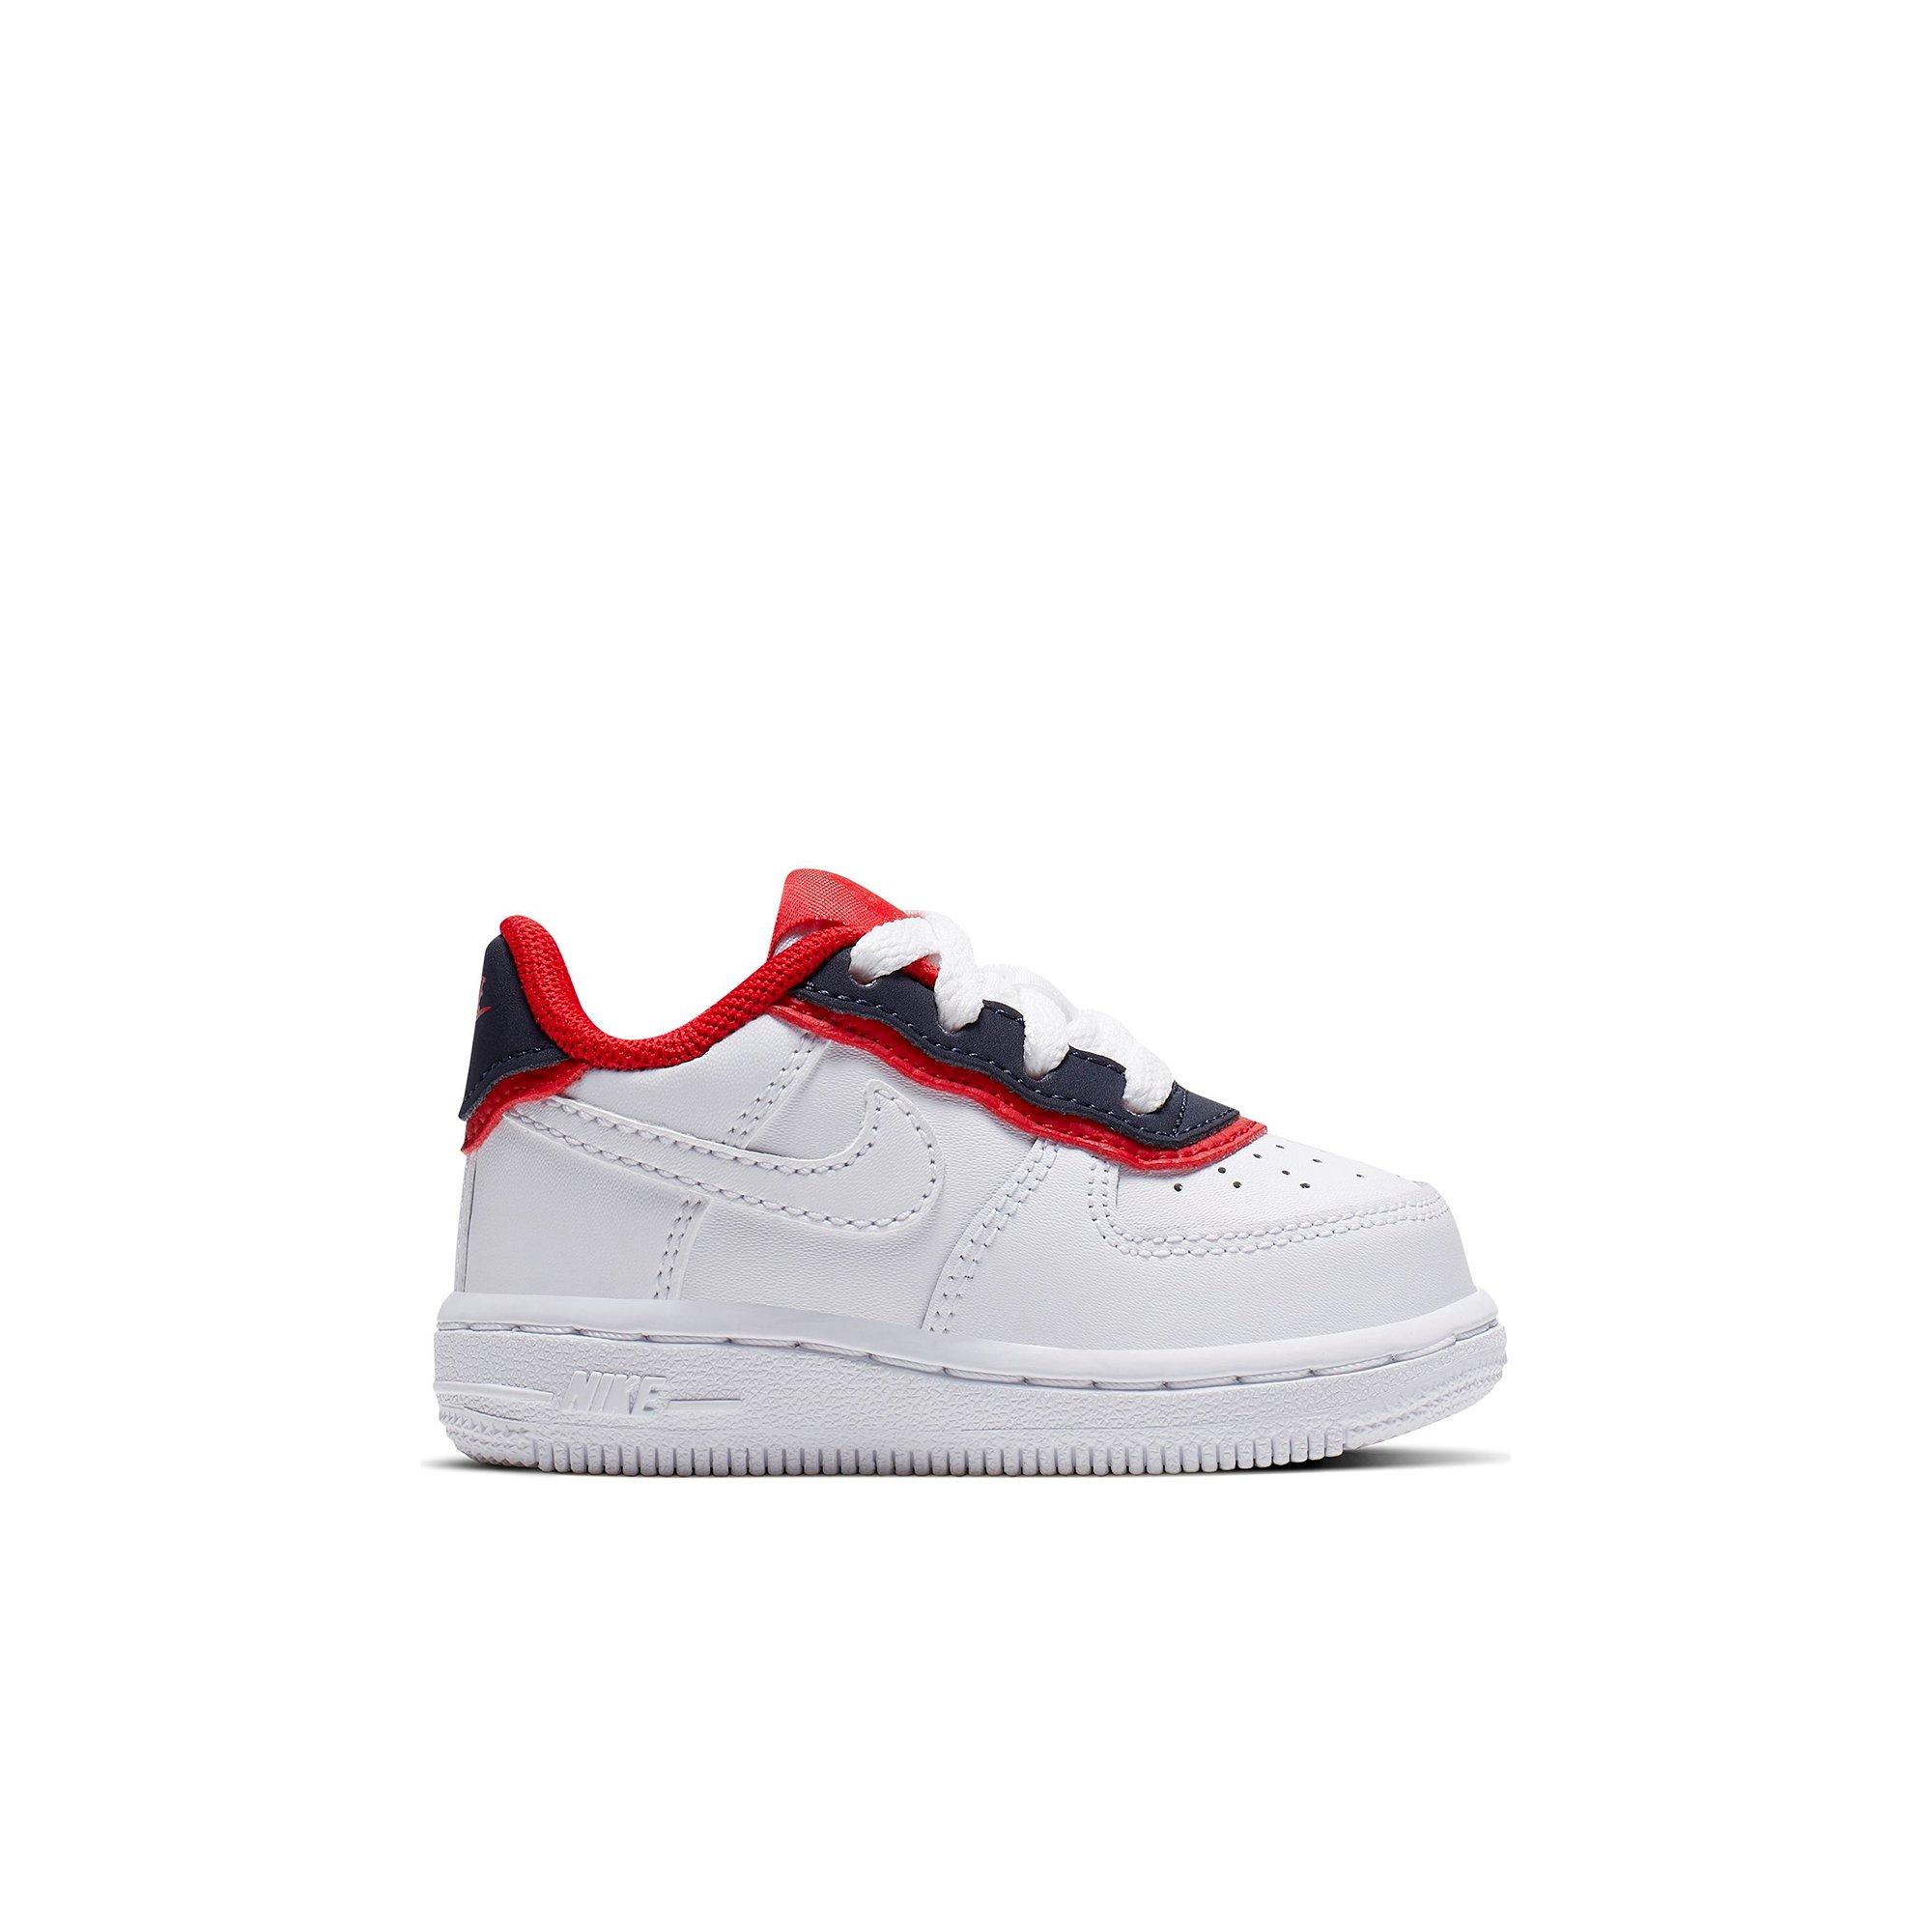 red and navy blue air force 1